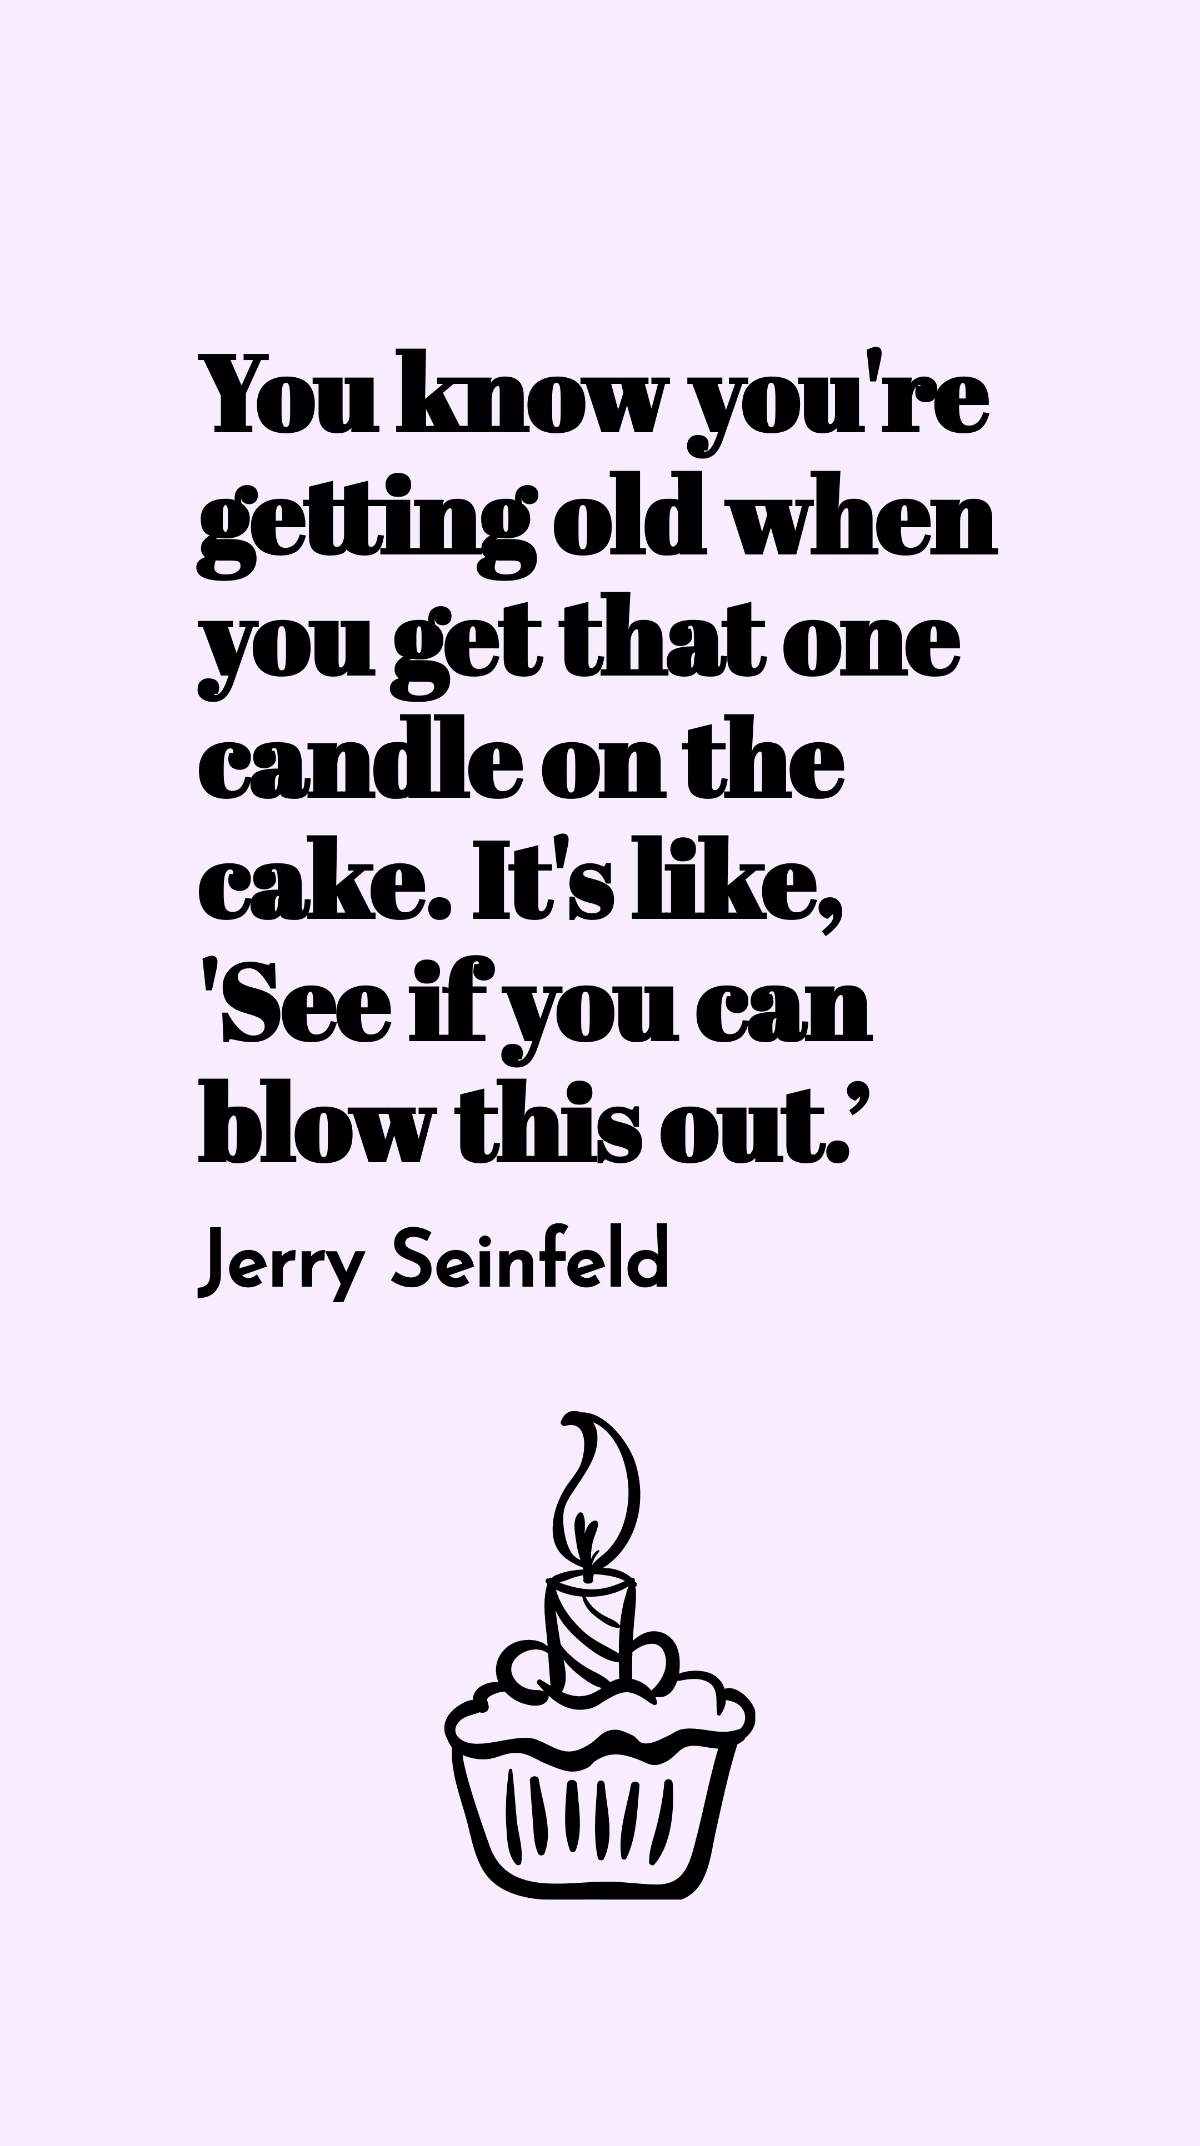 Jerry Seinfeld - You know you're getting old when you get that one candle on the cake. It's like, 'See if you can blow this out.’ Template